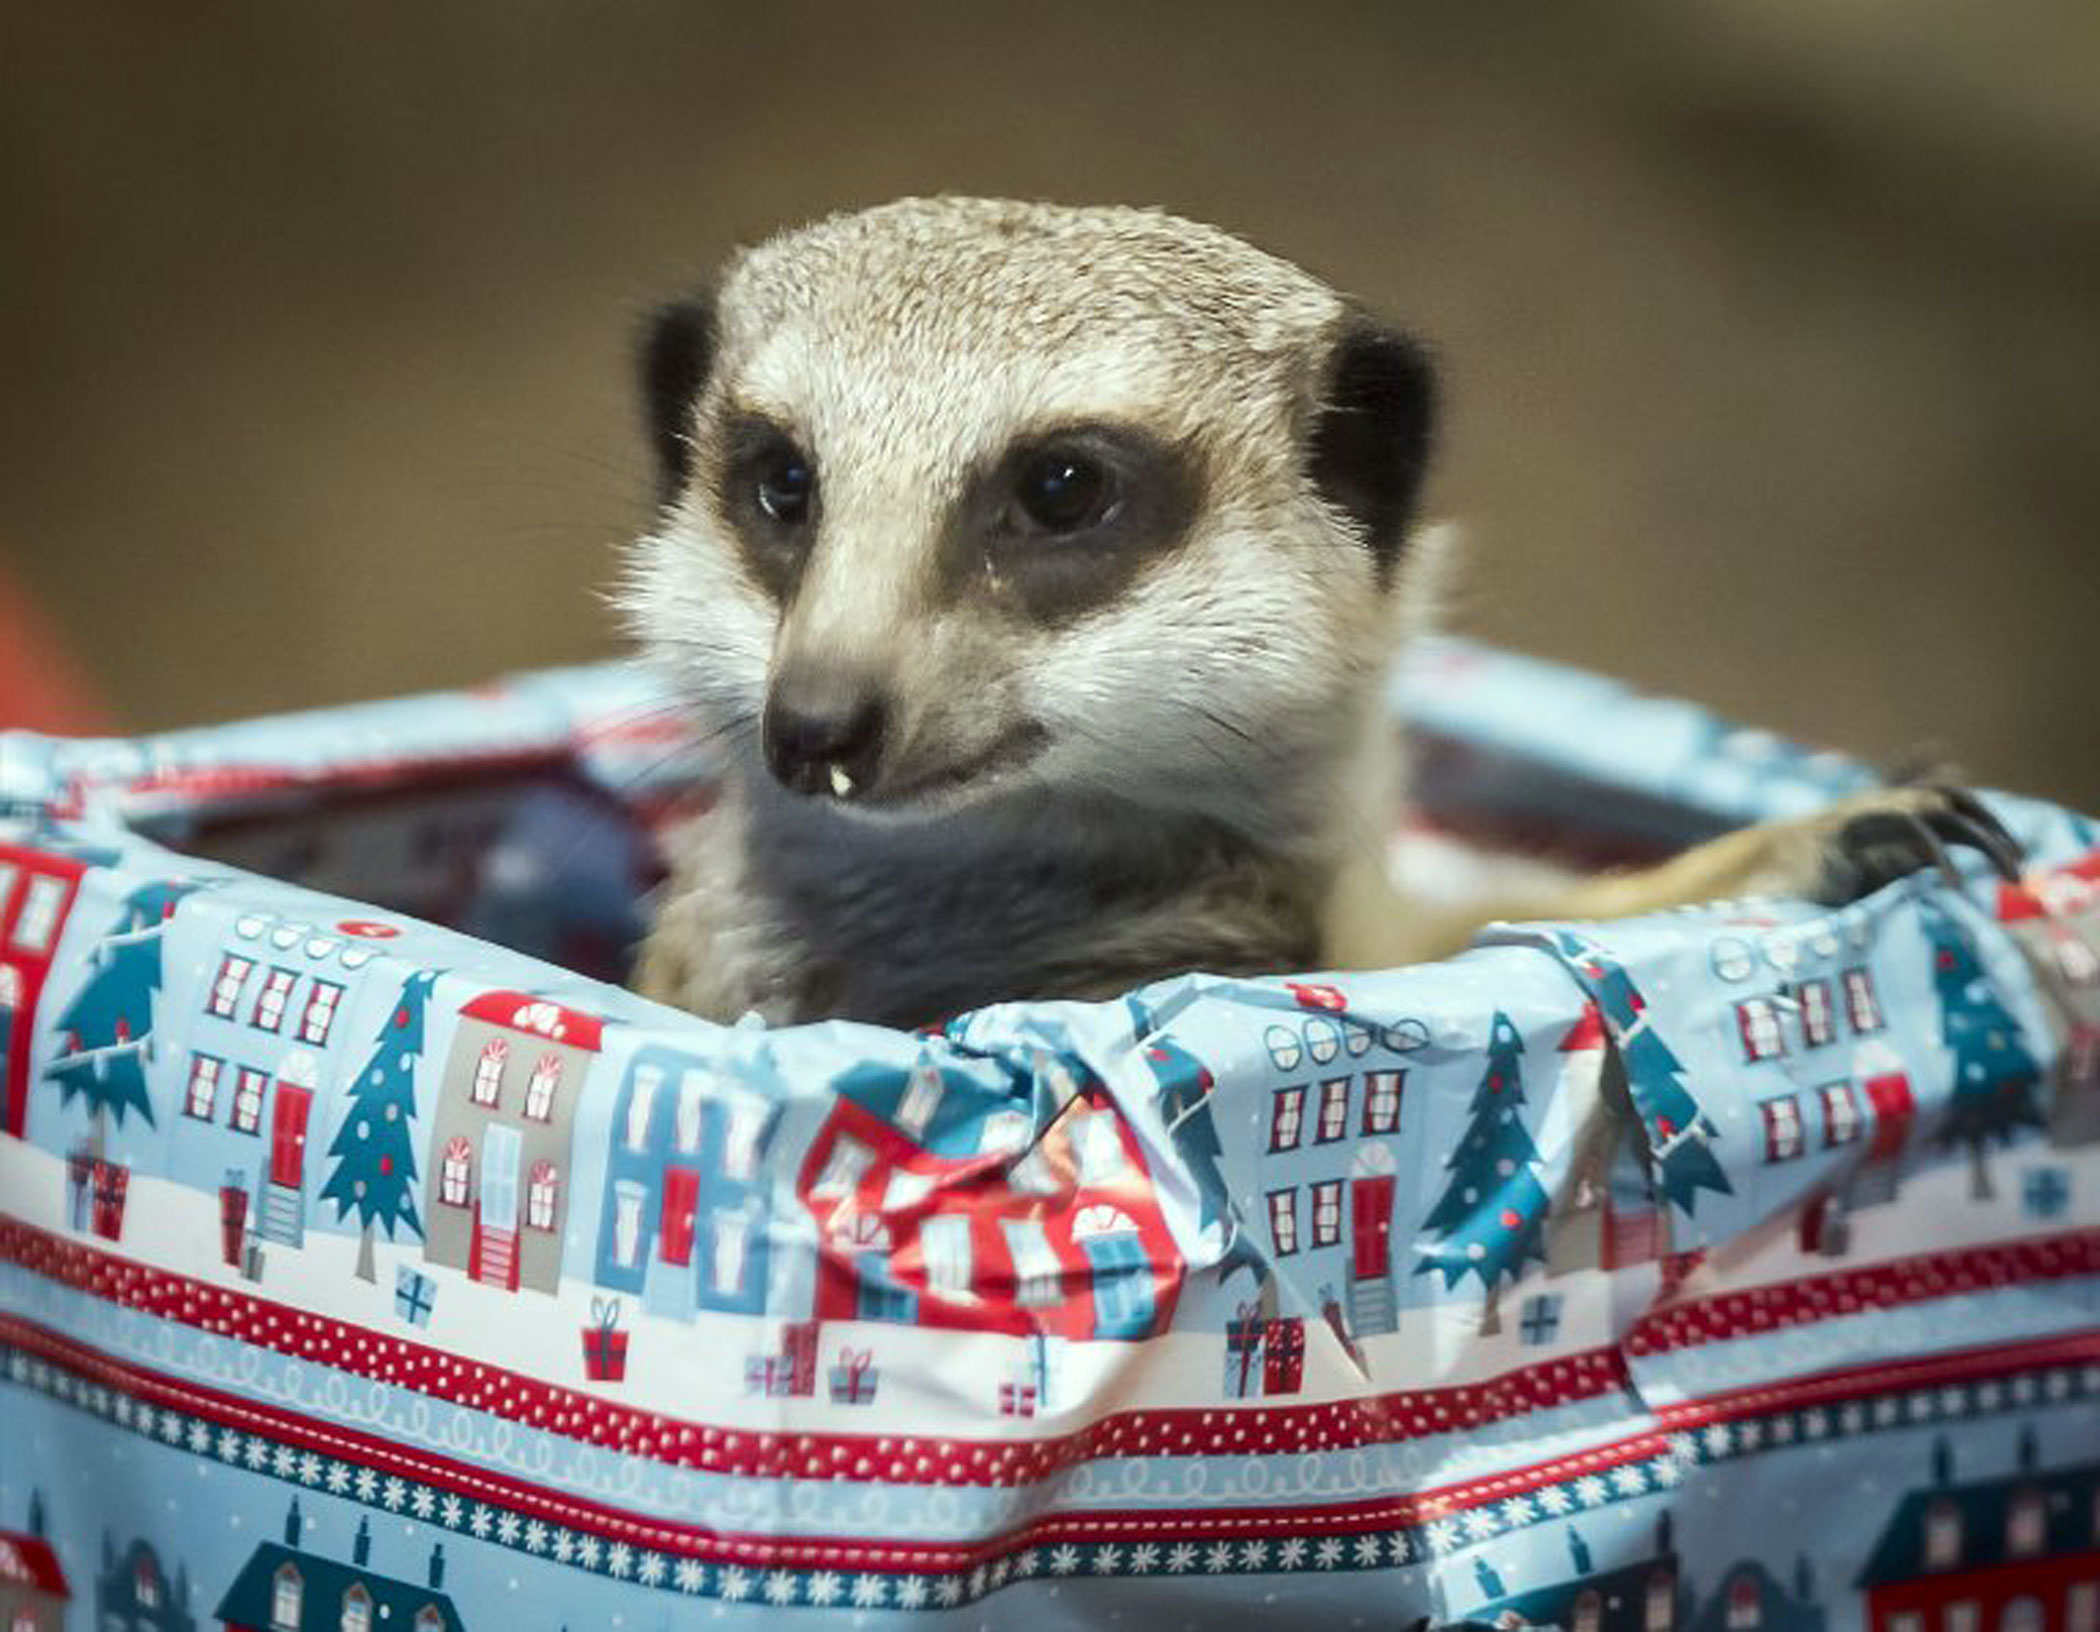 A meerkat at Edinburgh Zoo in Scotland peeks out from a package containing treats aboard a sleigh.